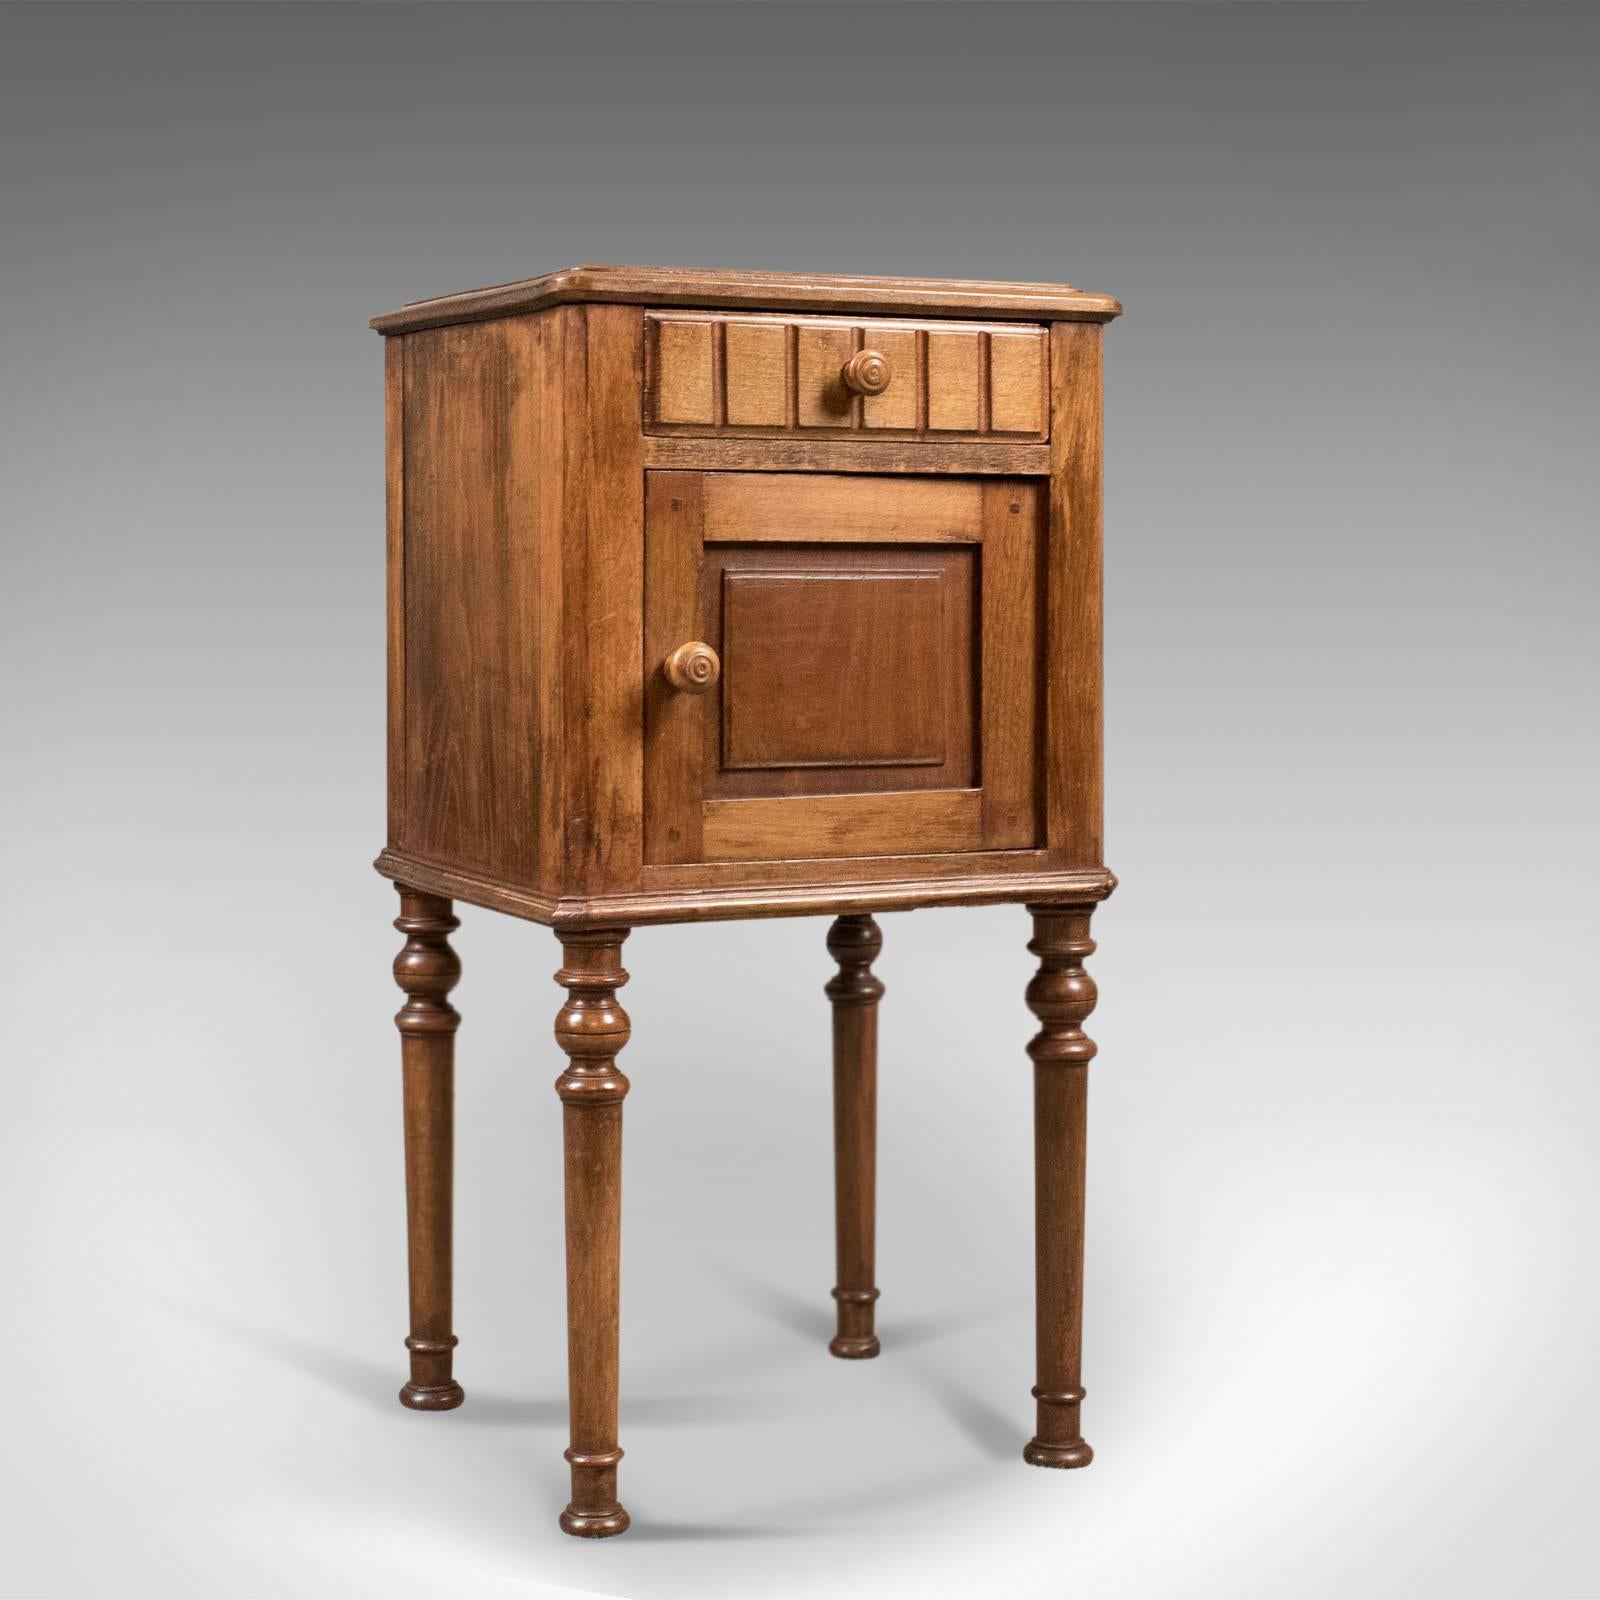 This is an appealing antique bedside cabinet, Victorian pot cupboard dating to the turn of the century, circa 1900.

English elm with attractive honey tones and an aged patina
The top double displaying good grain detail and double edge